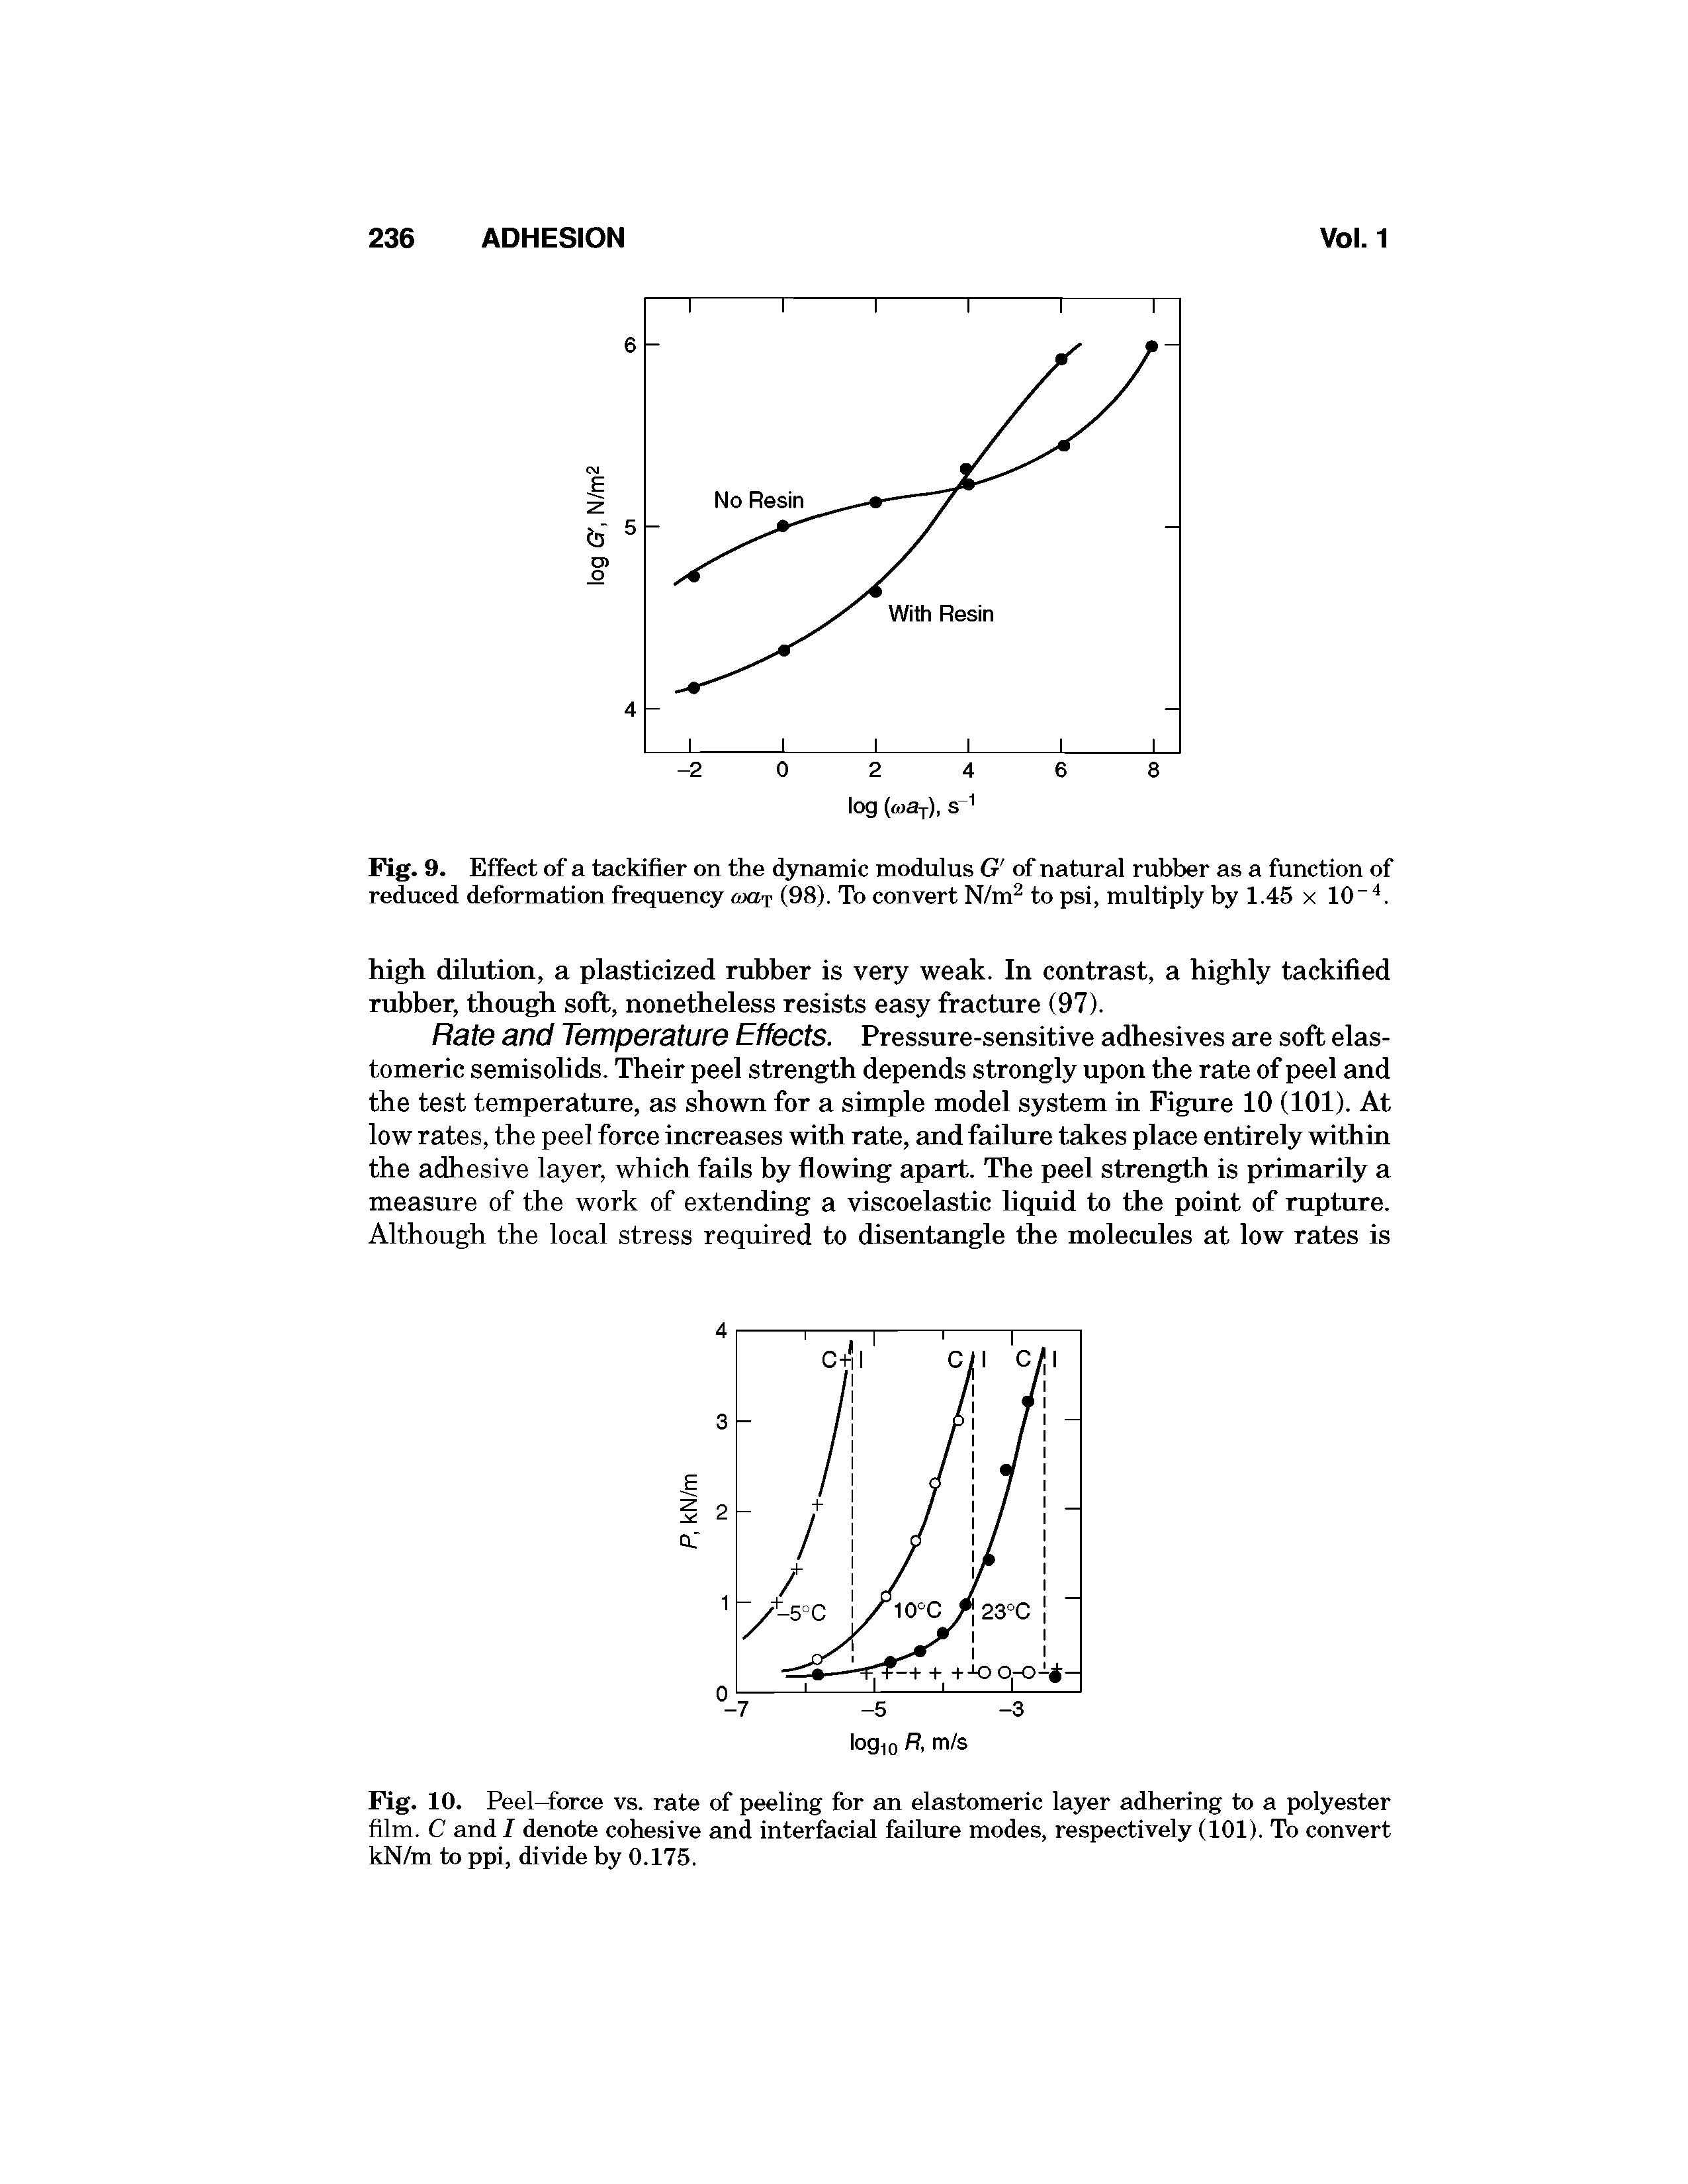 Fig. 10. Peel-force vs. rate of peeling for an elastomeric layer adhering to a polyester film. C and I denote cohesive and interfacial failure modes, respectively (101). To convert kN/m to ppi, divide by 0.175.